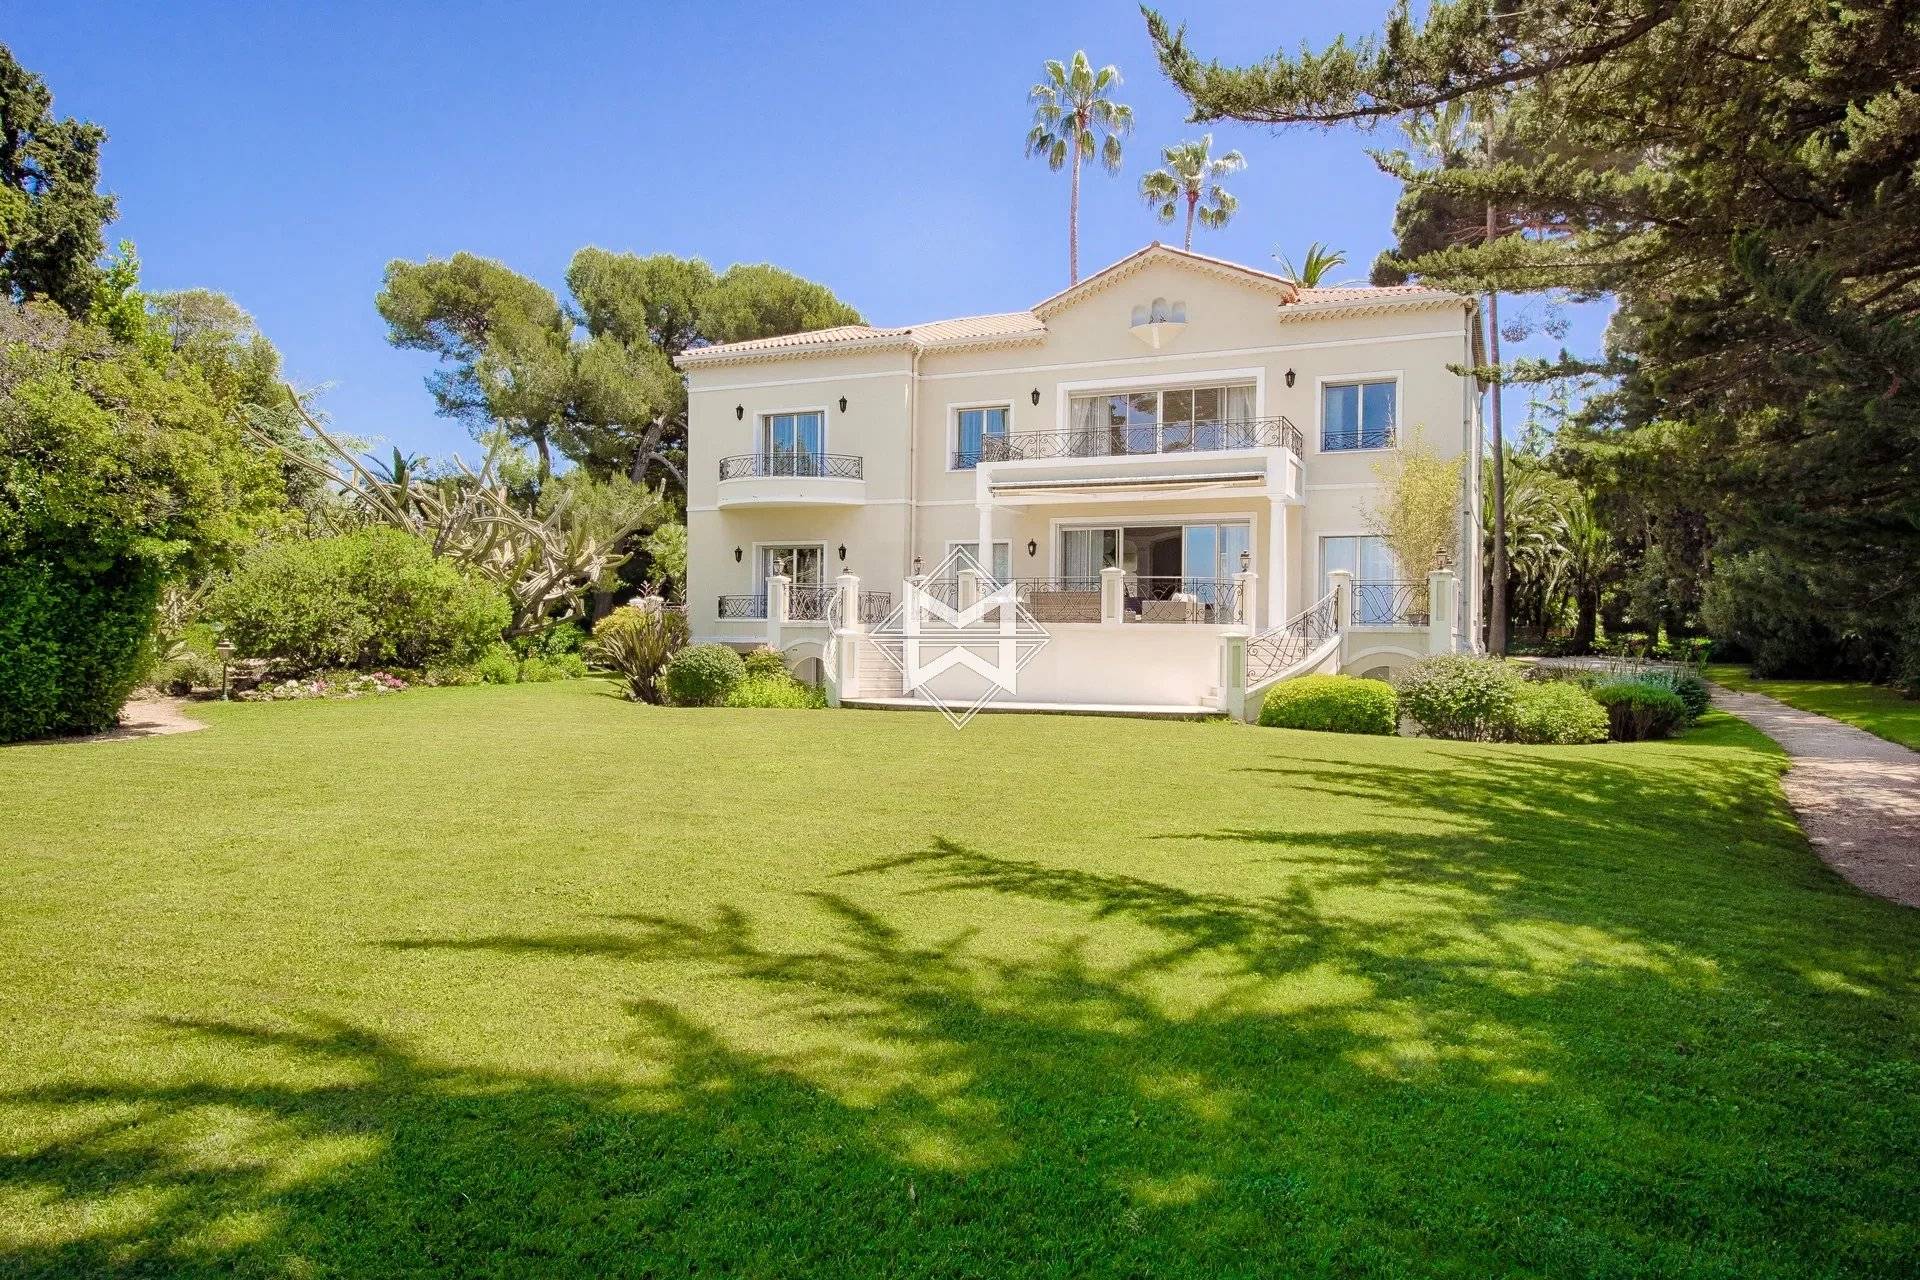 Magnificent villa of about 700 sqm built in the Palladian style located on the seafront